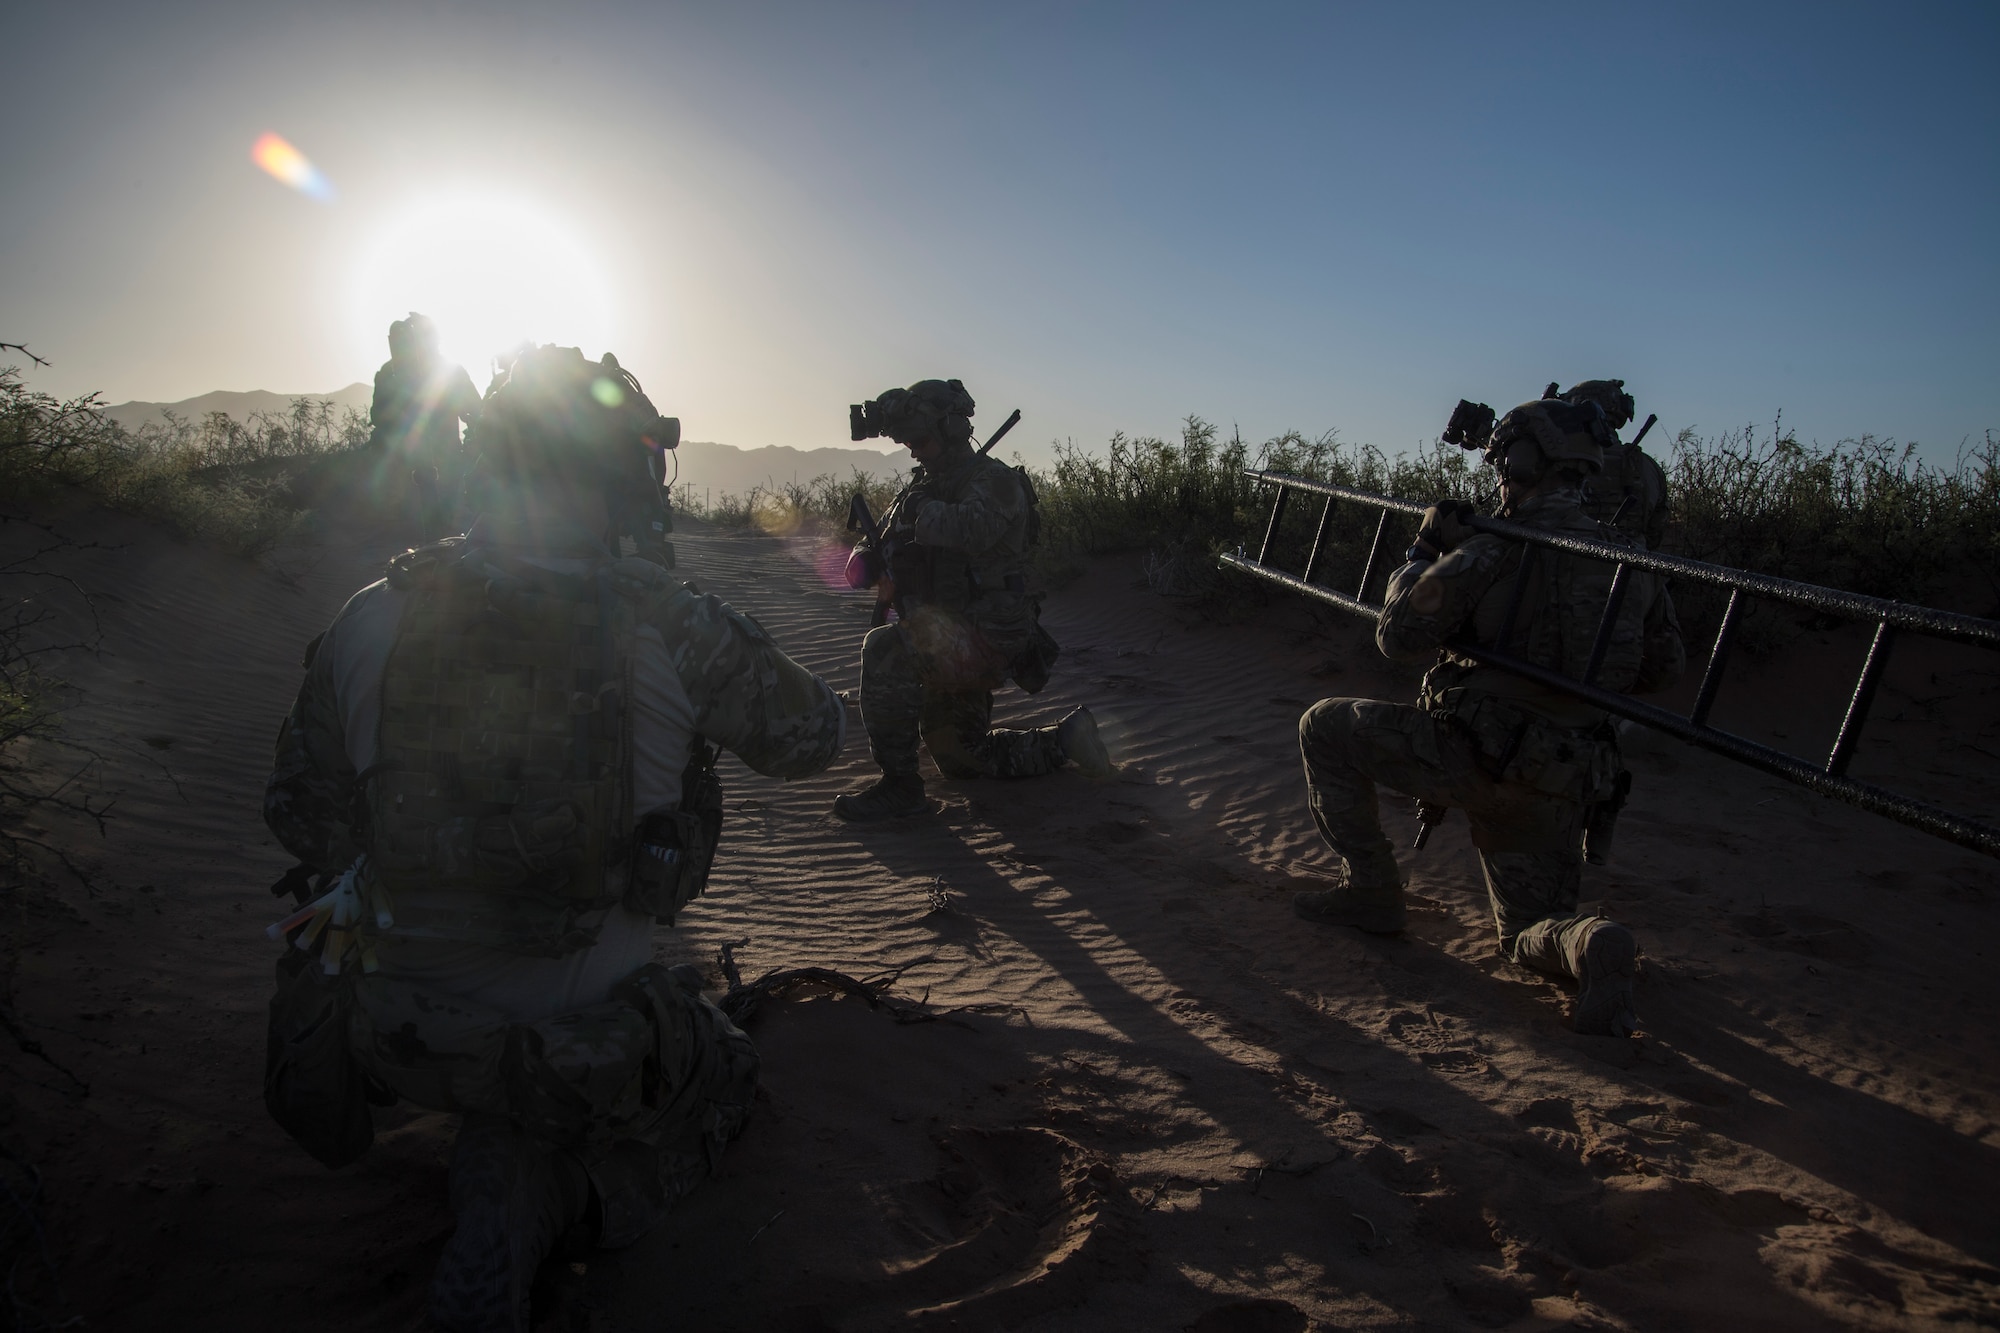 Special Tactics Airmen with the 21st Special Tactics Squadron prepare to infiltrate a compound at Fort Bliss, Texas, June 24, 2018.